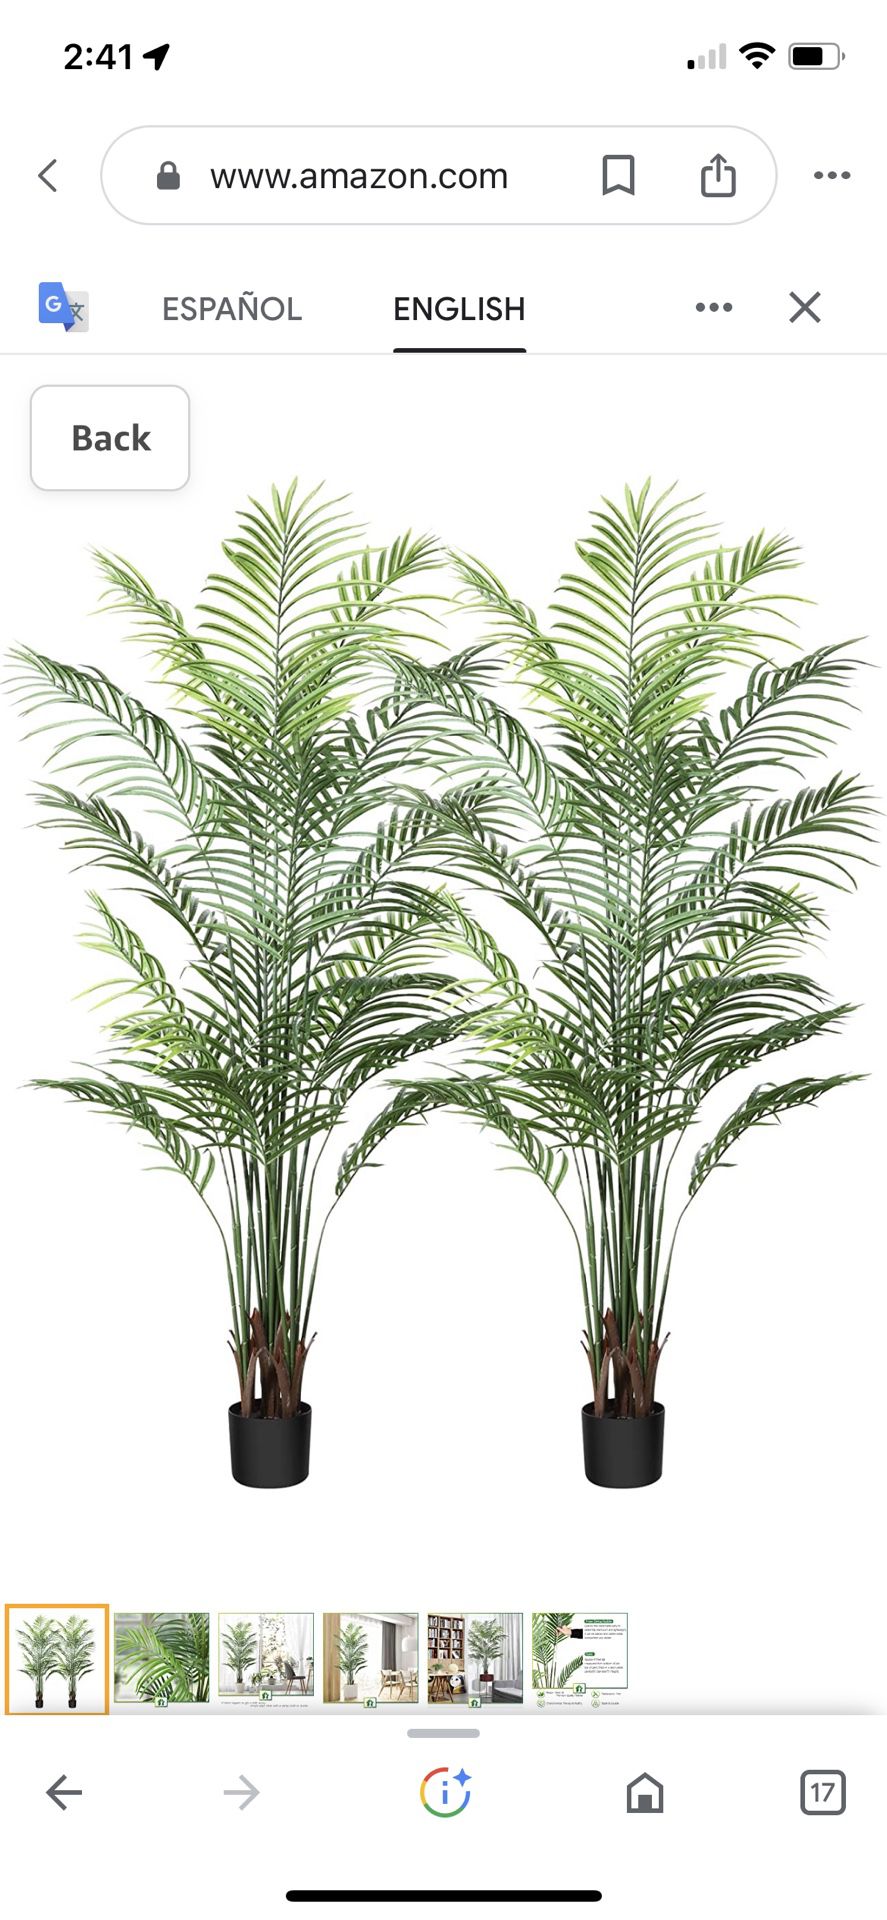 CROSOFMI 6' Artificial Areca Palm Plant, Fake Tropical Palm Tree, Perfect Faux Dypsis Lutescens Plants Potted for Indoor Outdoor Home Office Garden Mo